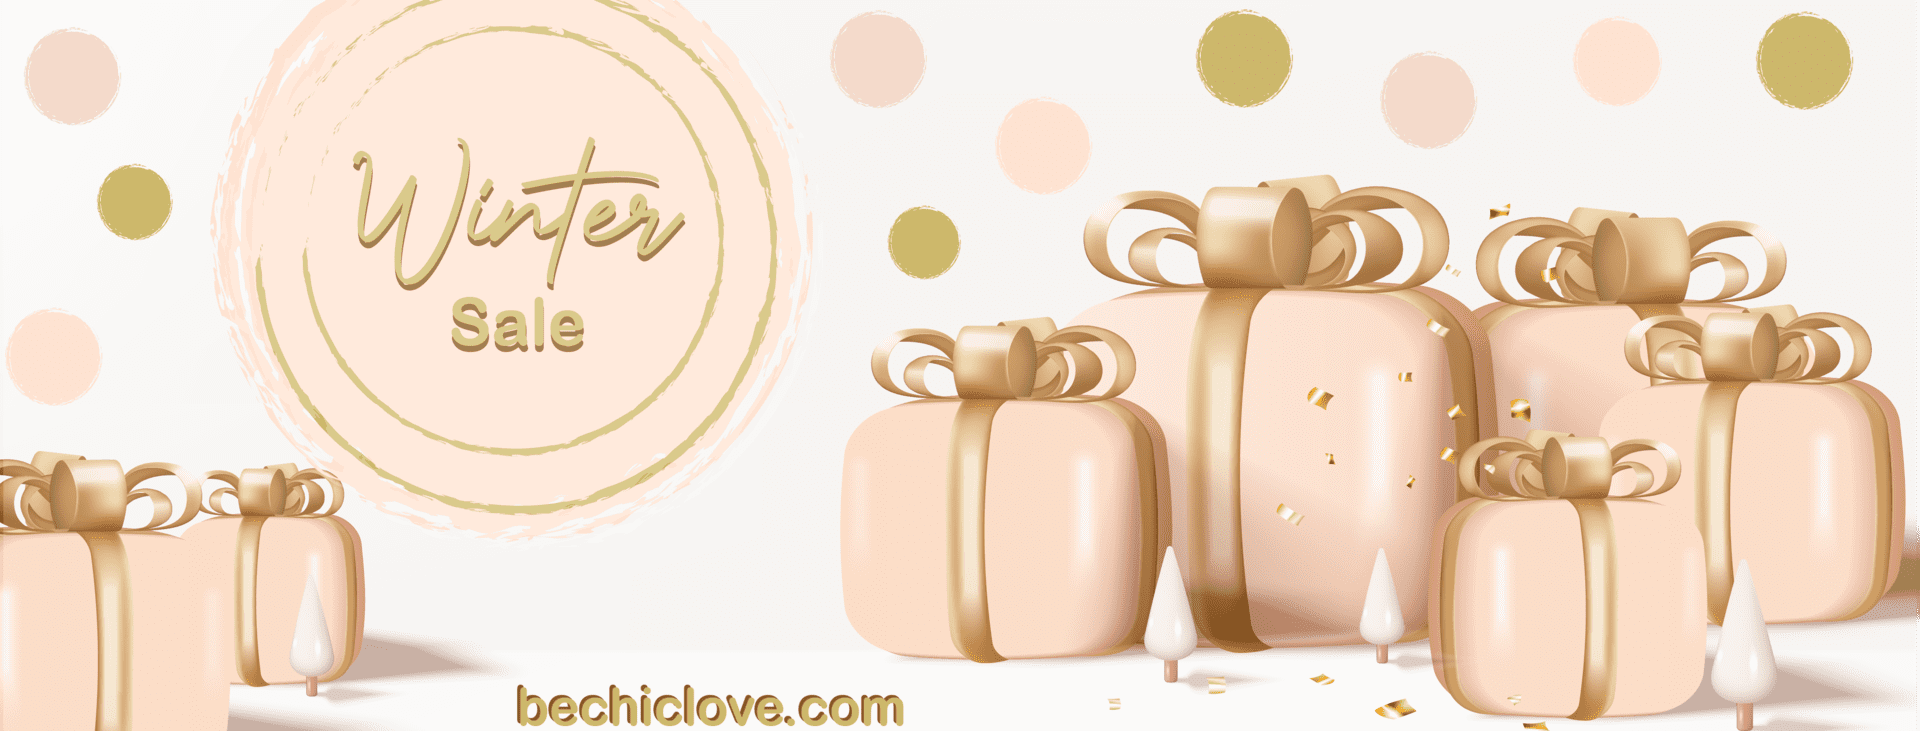 New collection - BechicLove